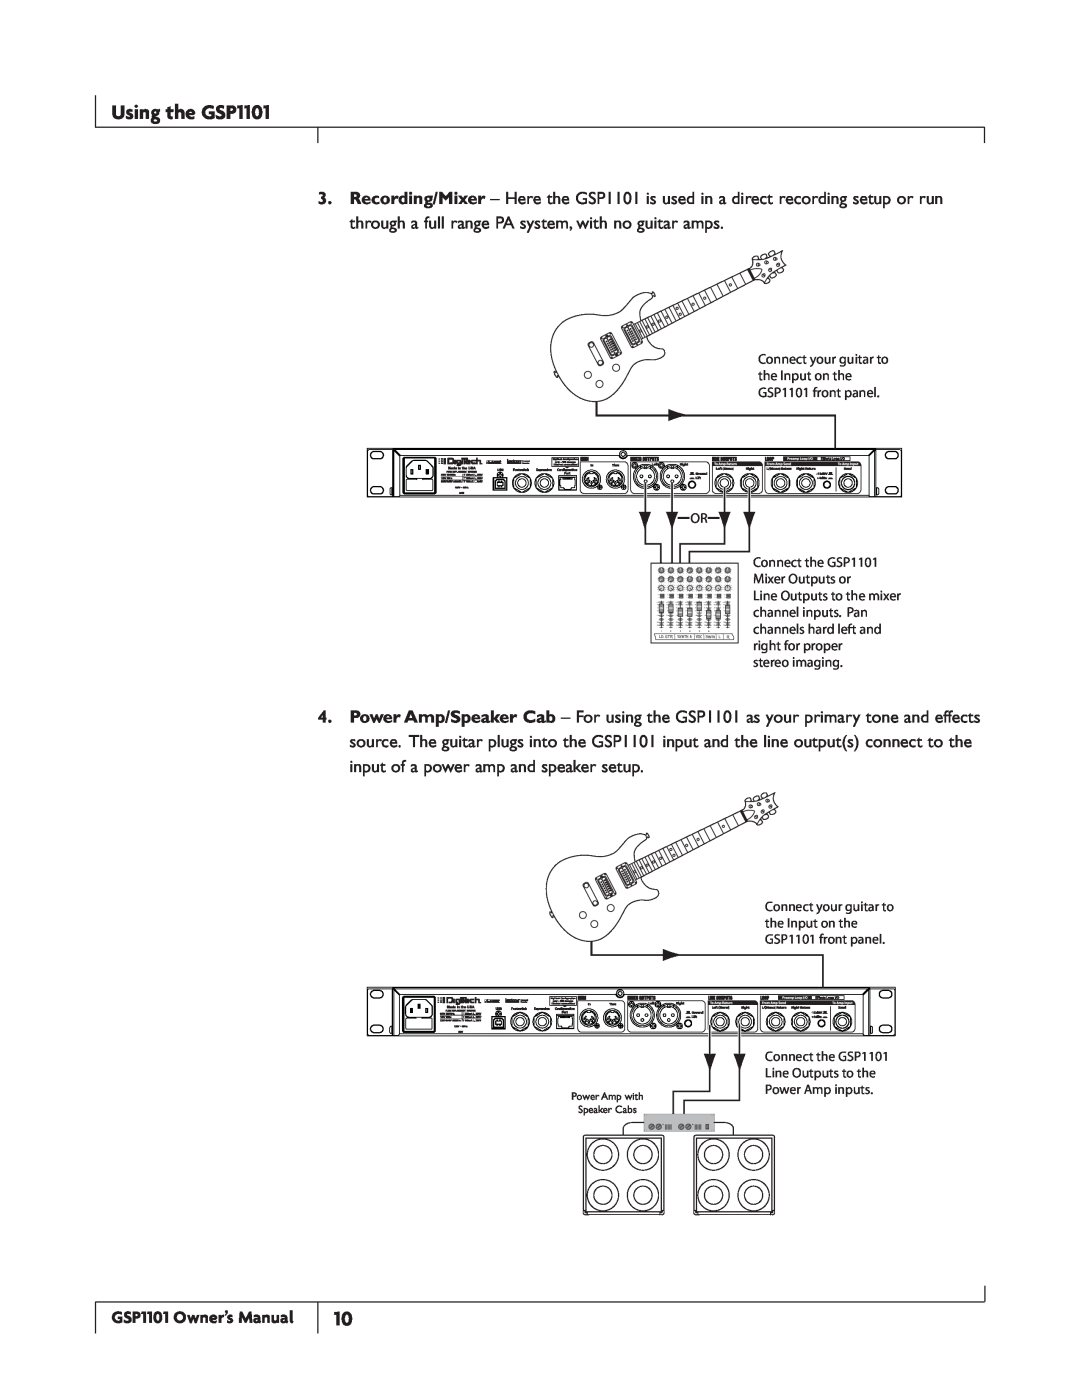 DigiTech owner manual Using the GSP1101, stereo imaging 